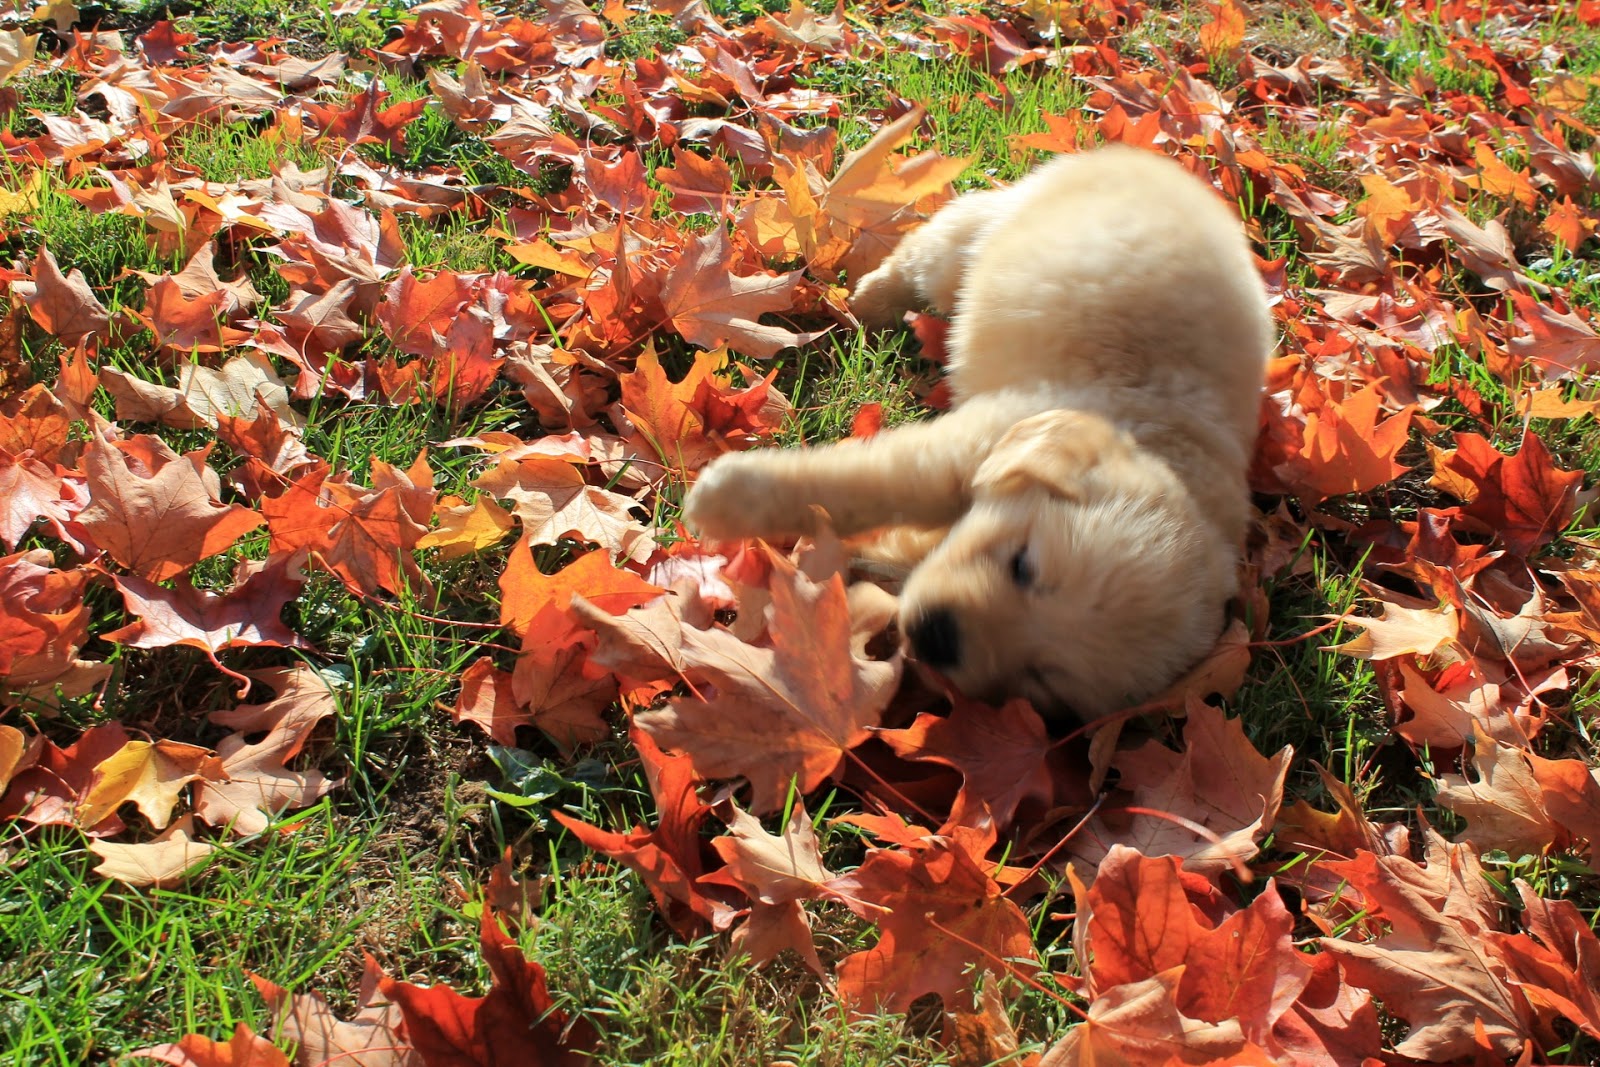 Puppy In Leaves Autumn leaves and a puppy